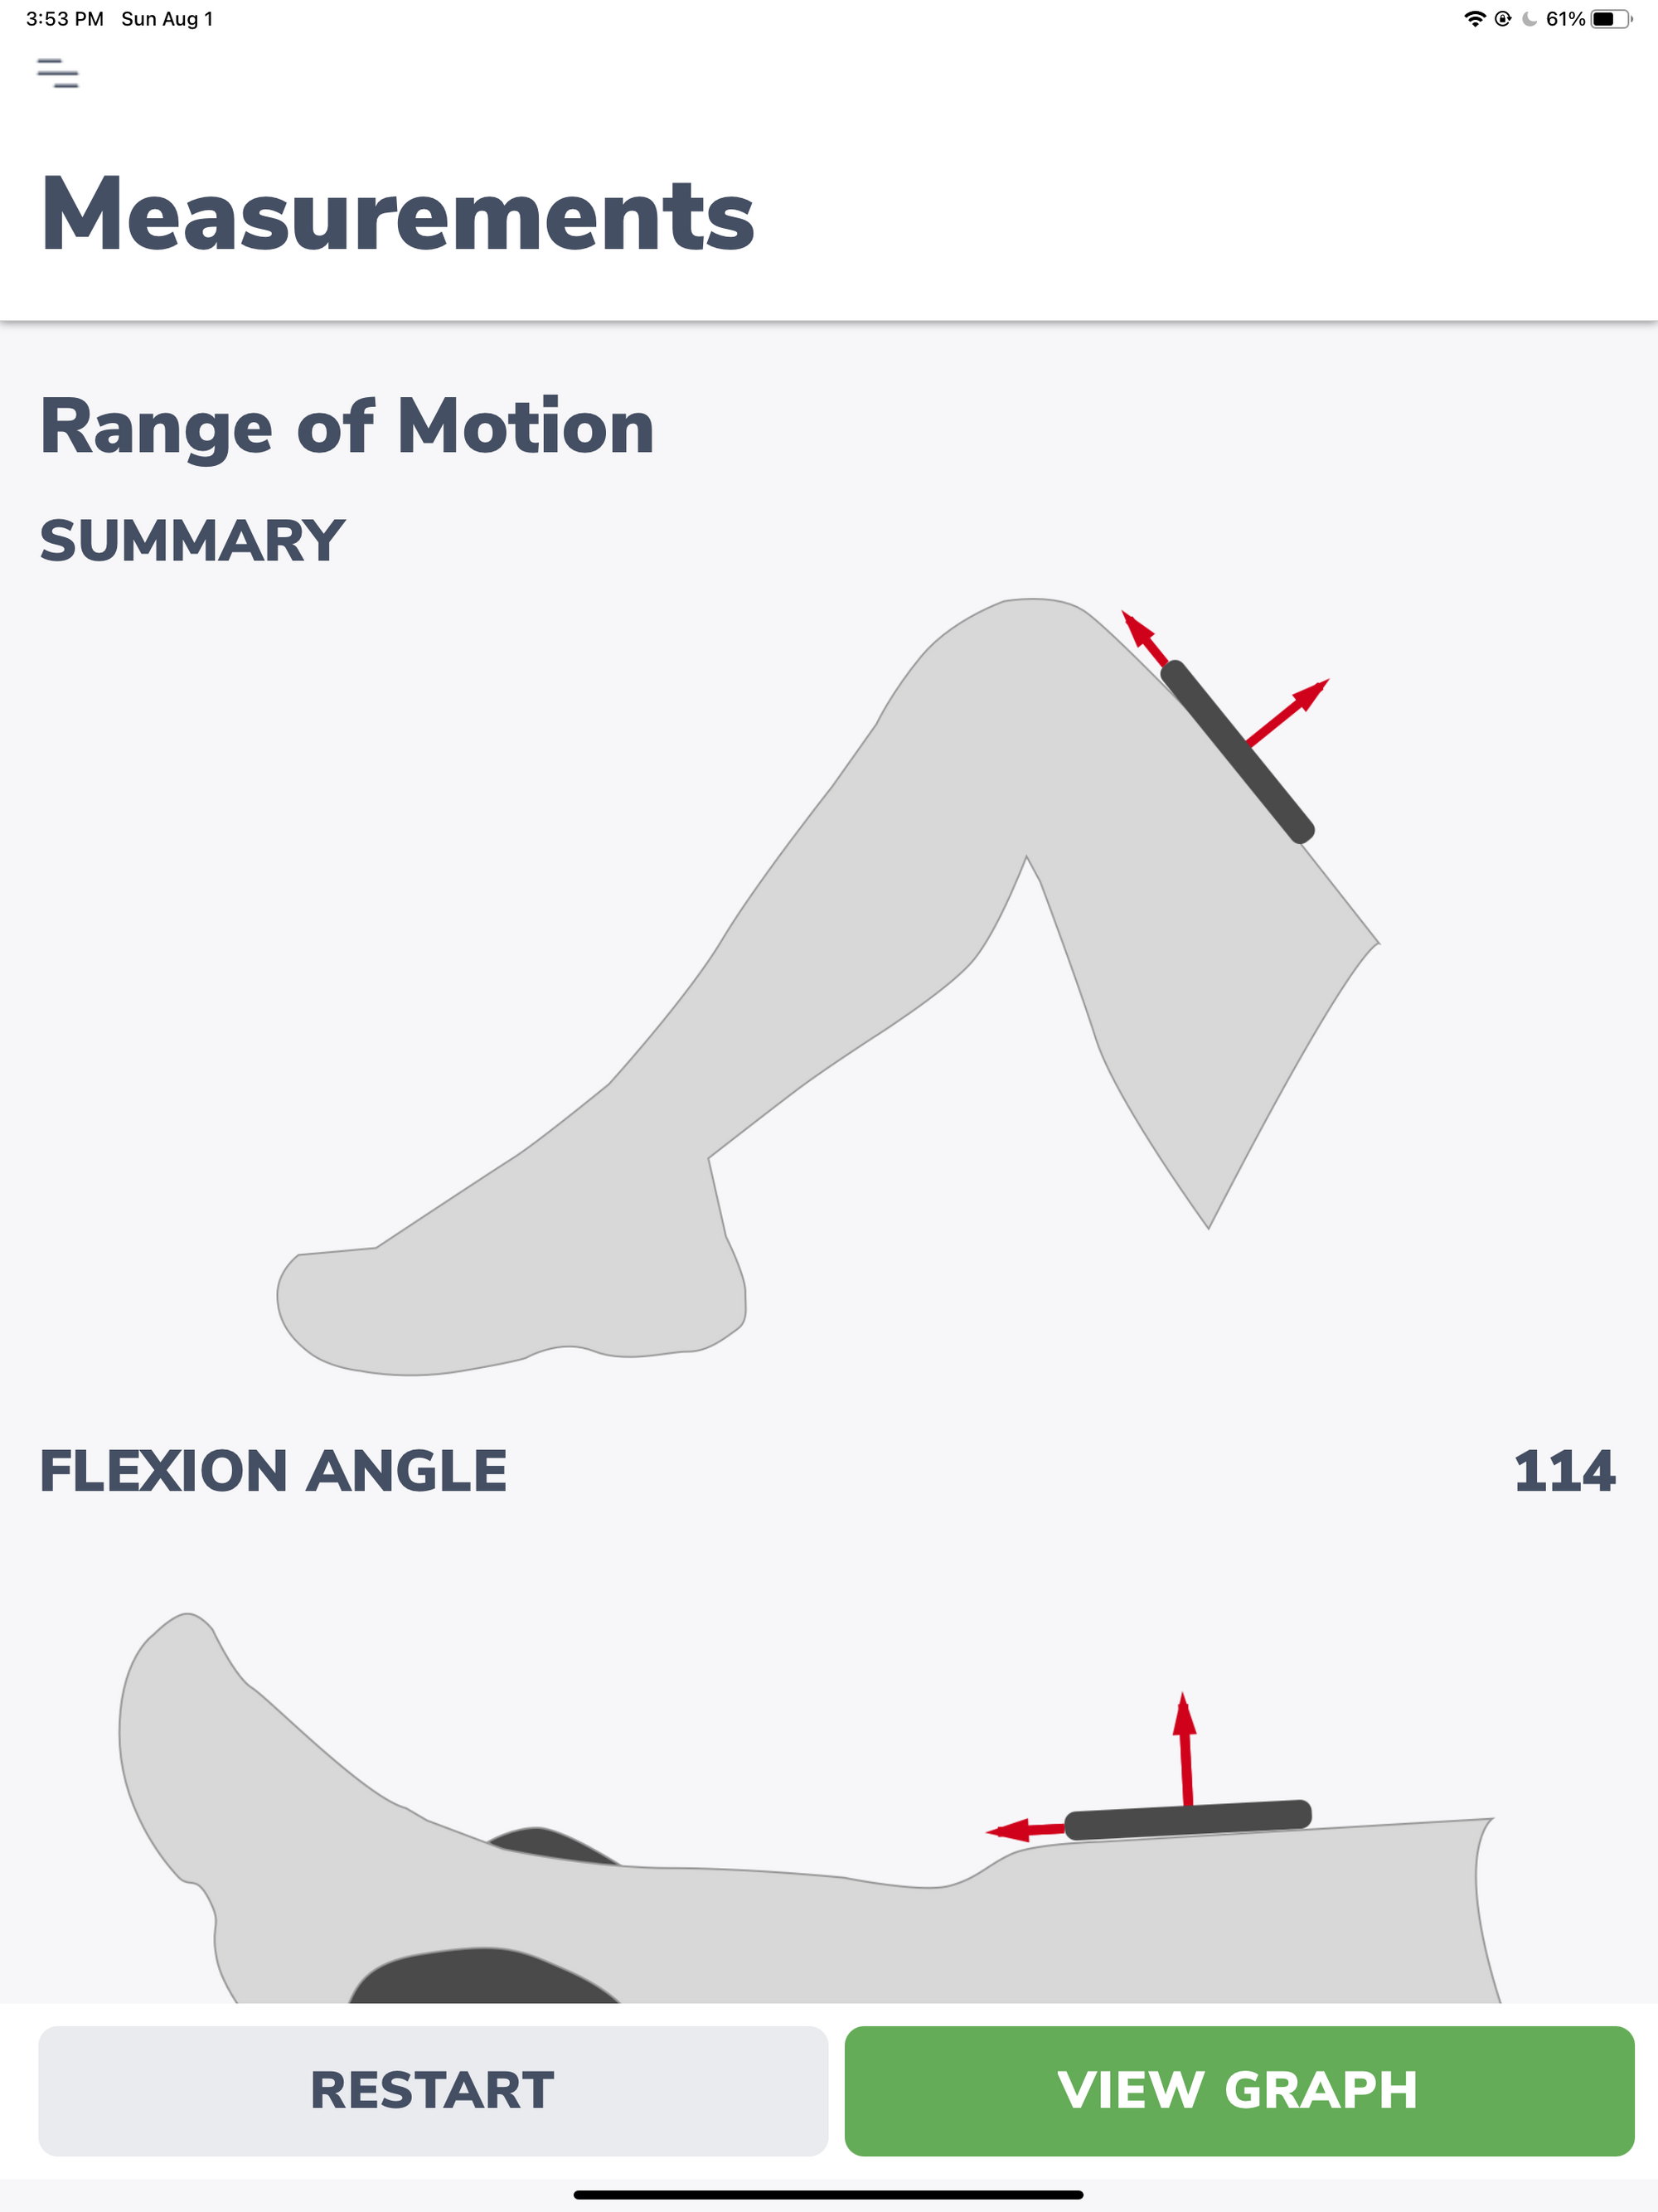 Why is range of motion important? Should I increase or maintain my range of motion?